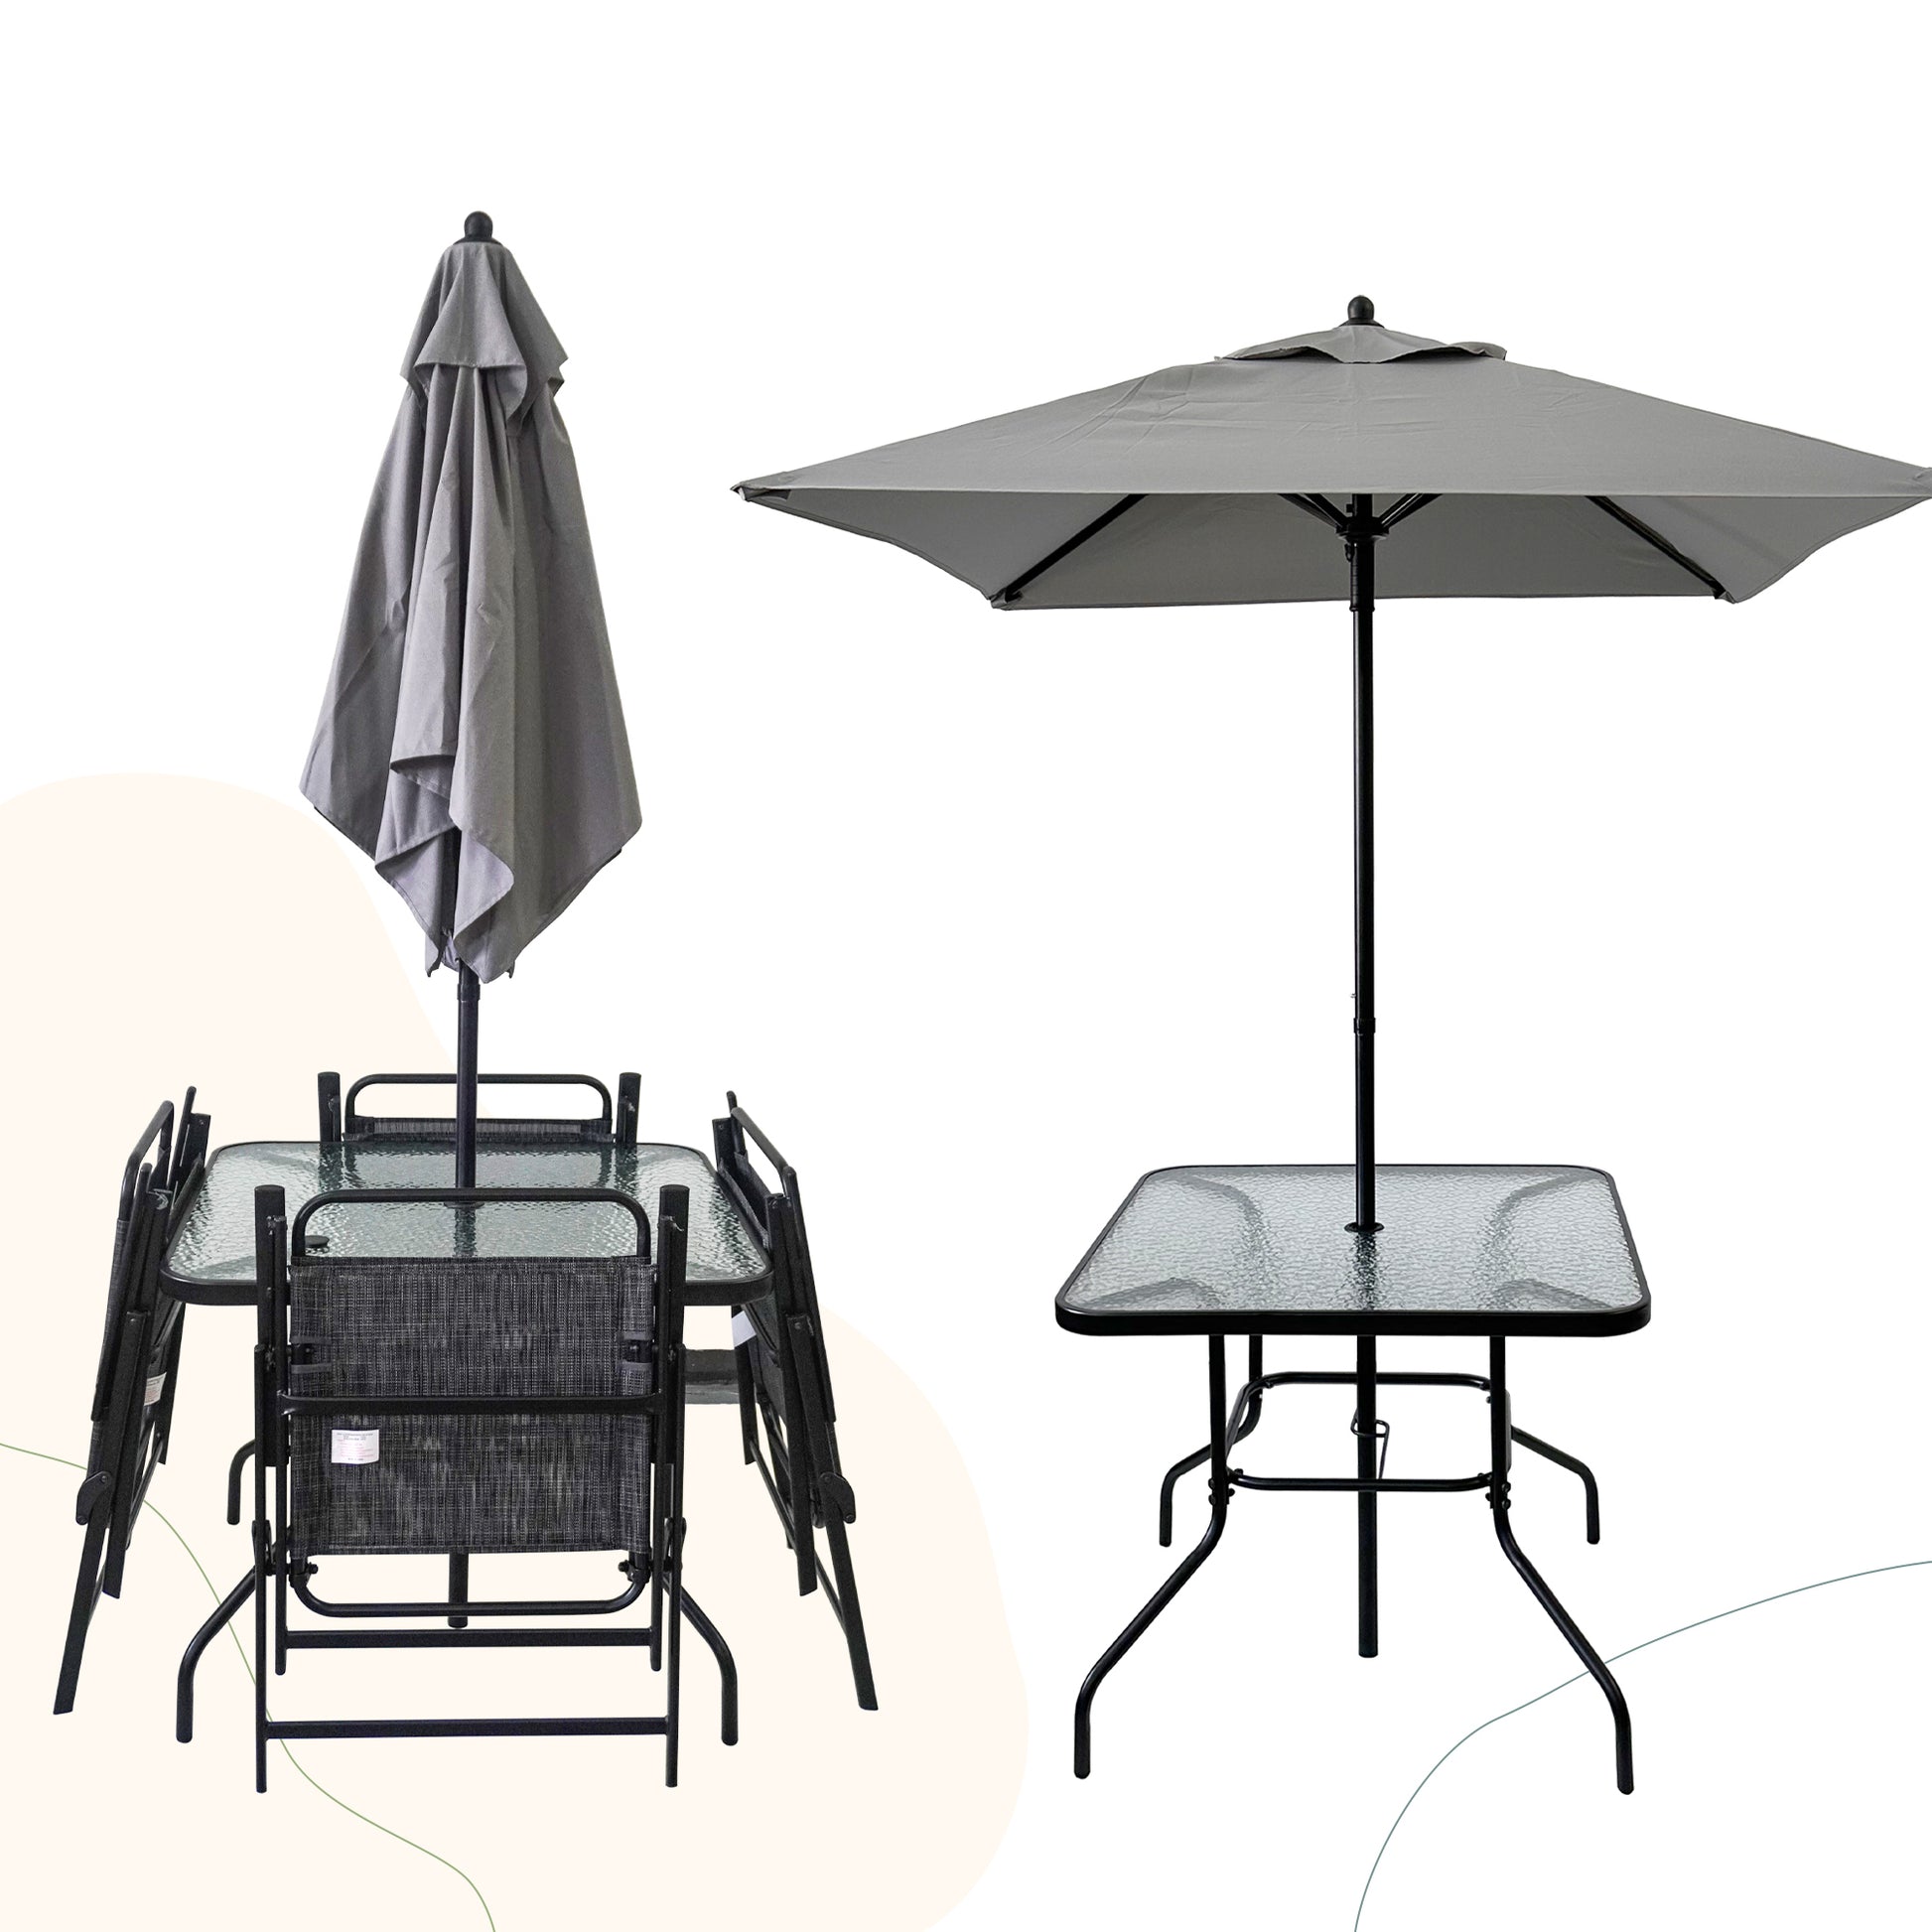 Outdoor Patio Dining Set for 4 People, Table and Chair Set, Umbrella